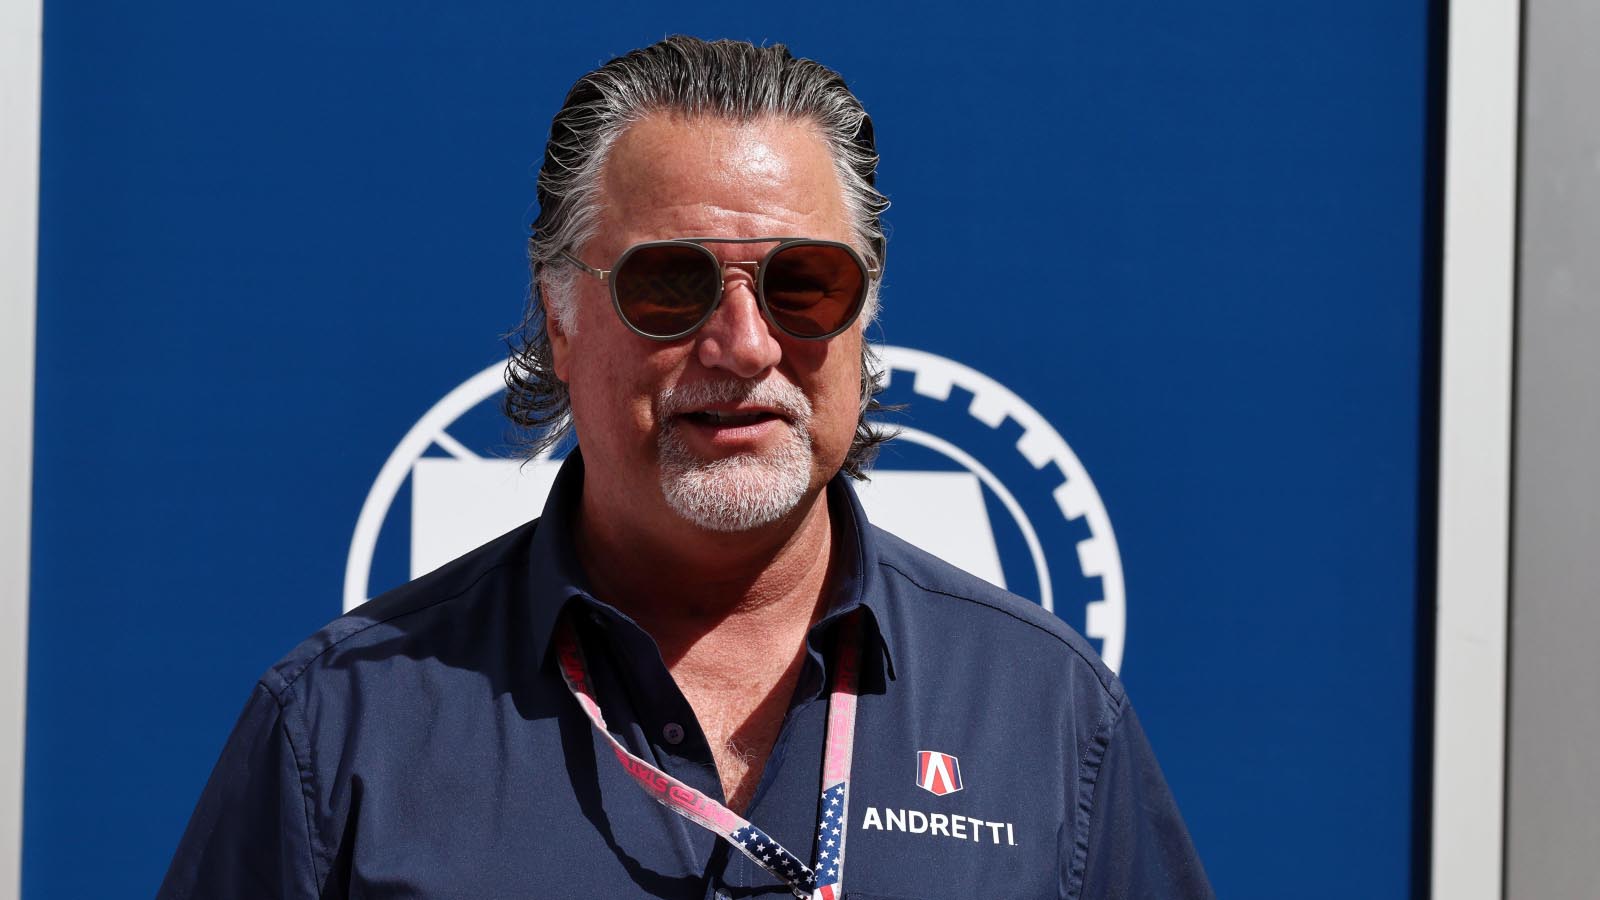 Michael Andretti hits out at F1's 'bunch of hillbillies' perception ...